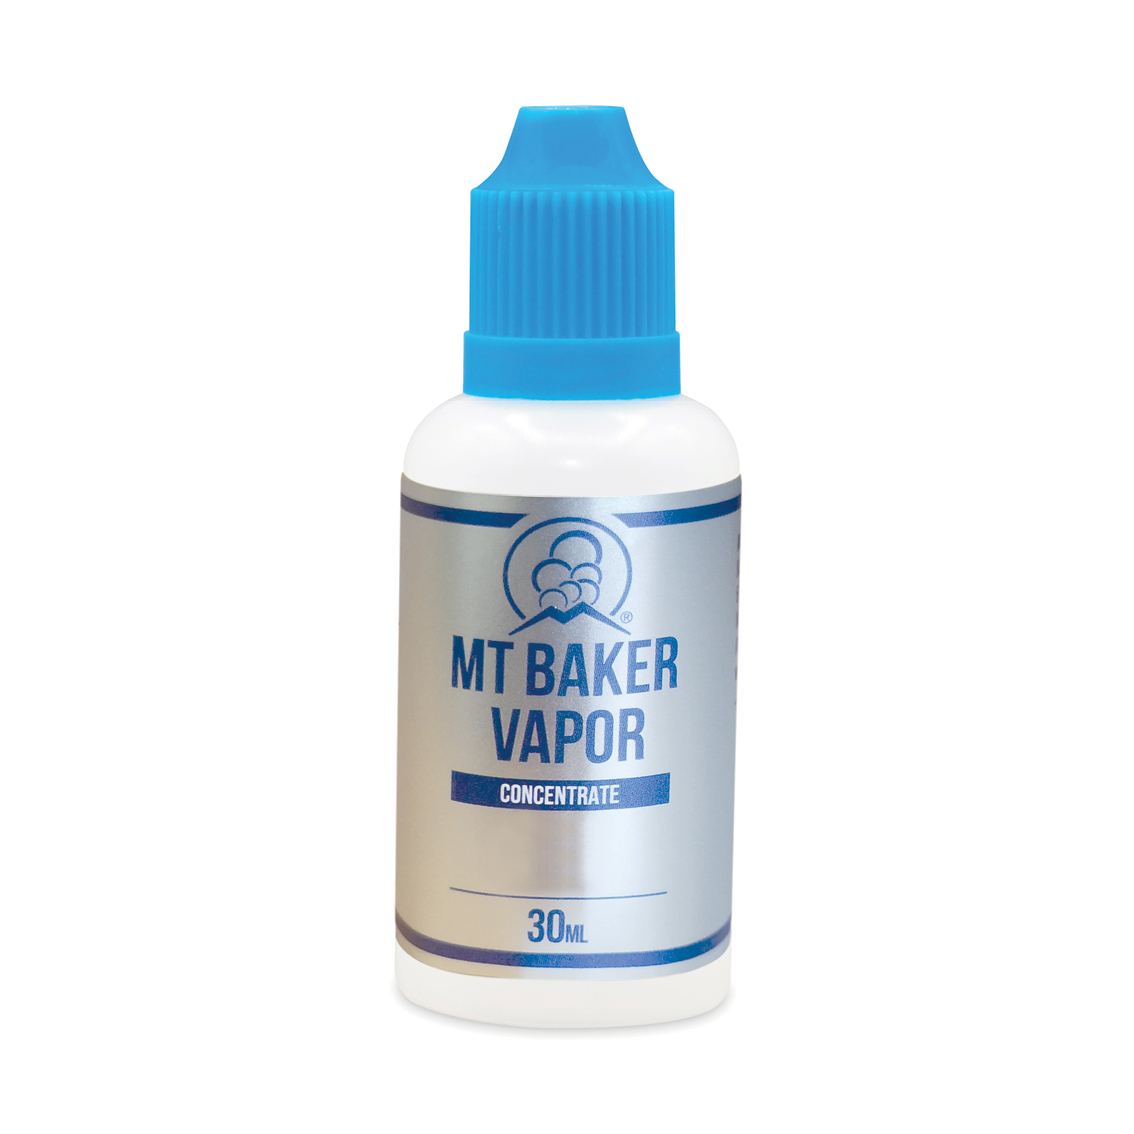 Forestberry Fusion Flavour Concentrate by Mt. Baker Vapor